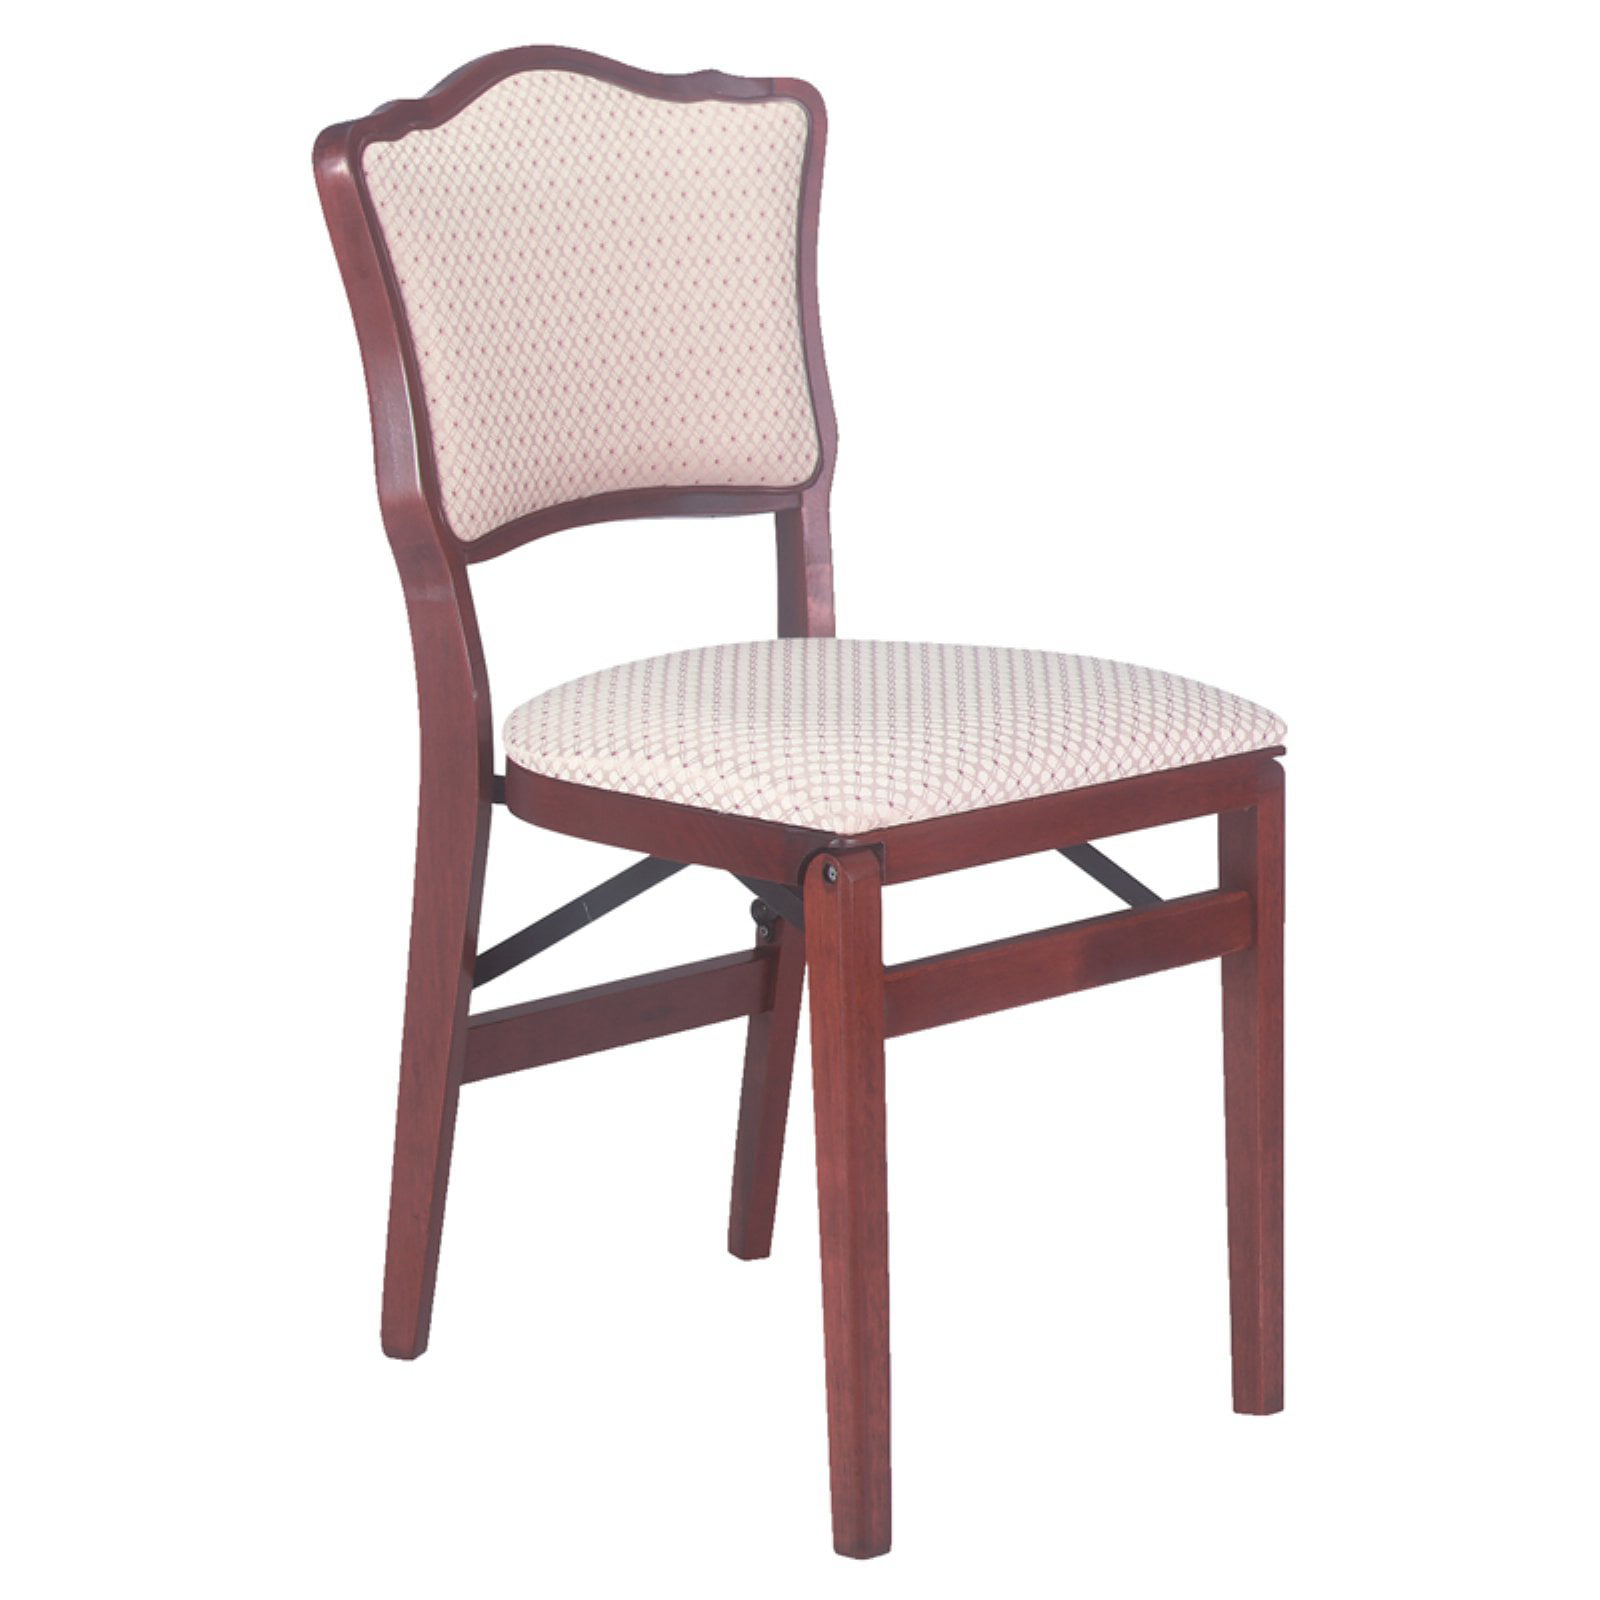 MECO Stakmore French Fabric Upholstered Seat Folding Chair Set, Cherry